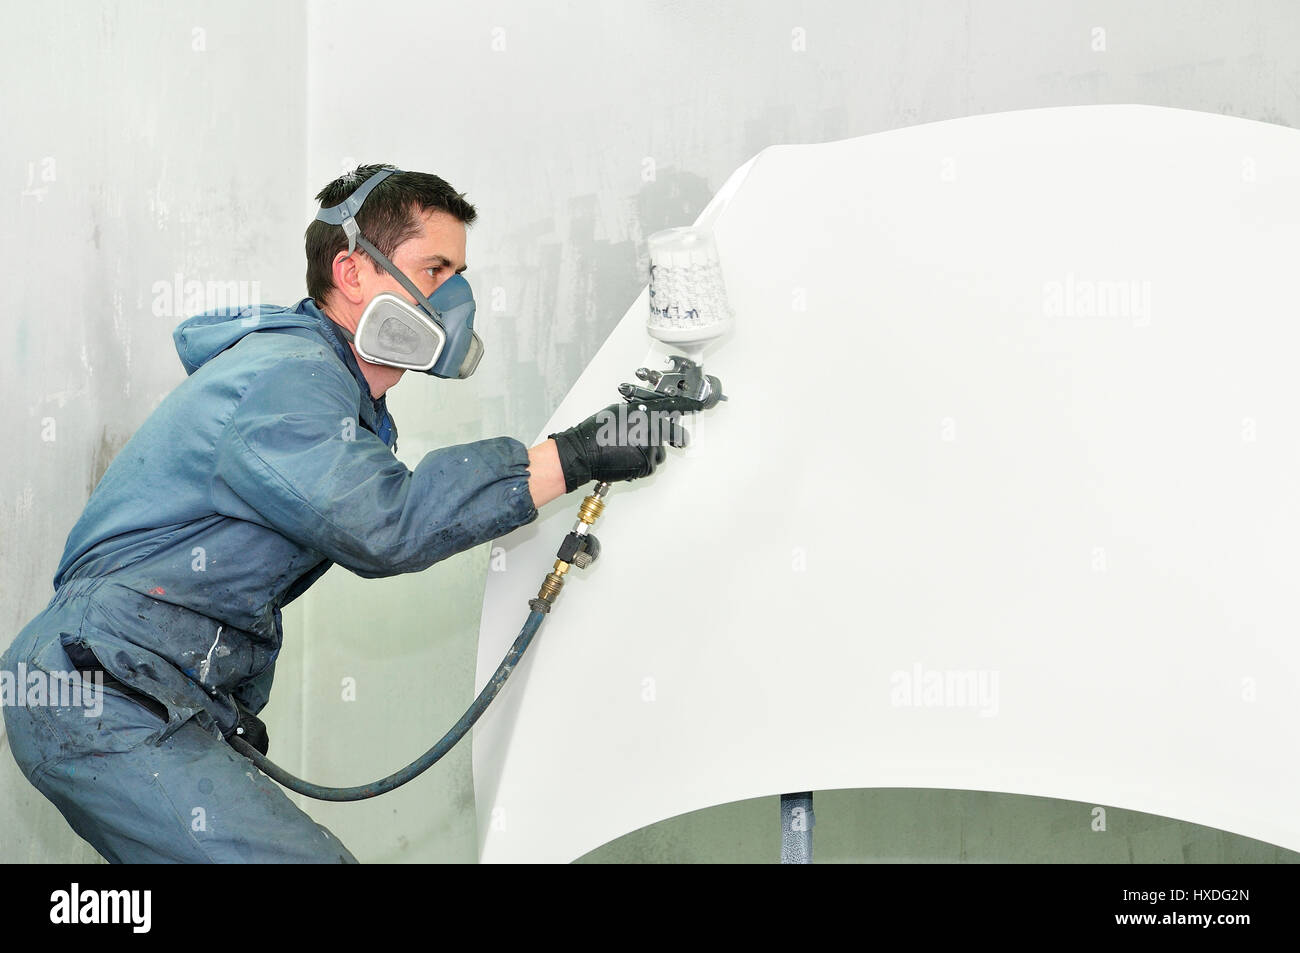 Worker painting white car. Stock Photo